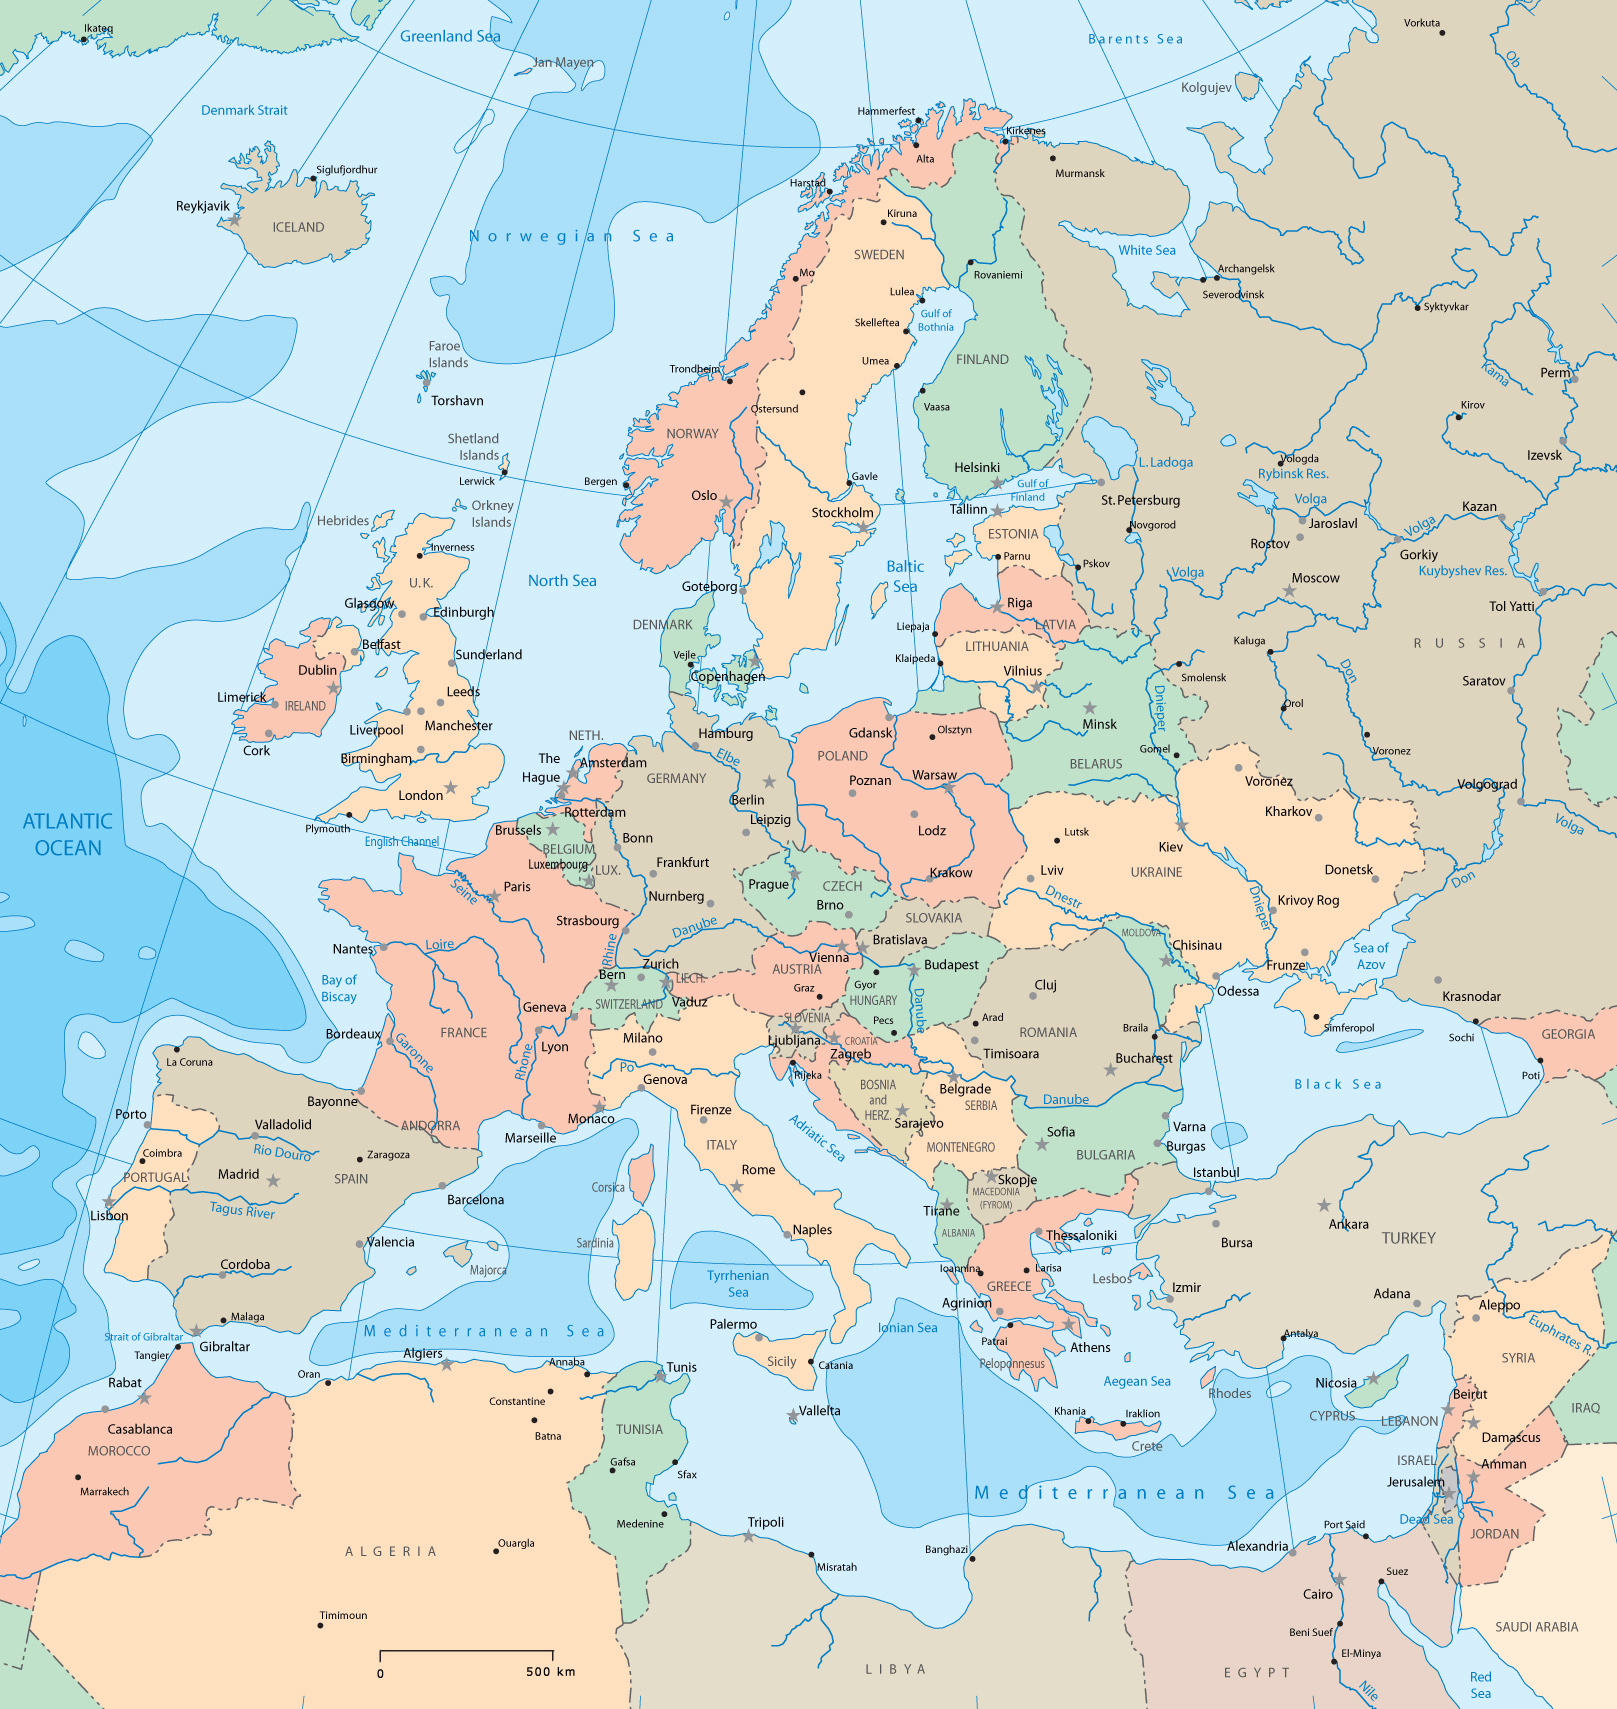 Large Detailed Political Map Of Europe Europe Mapsland Maps Of Images